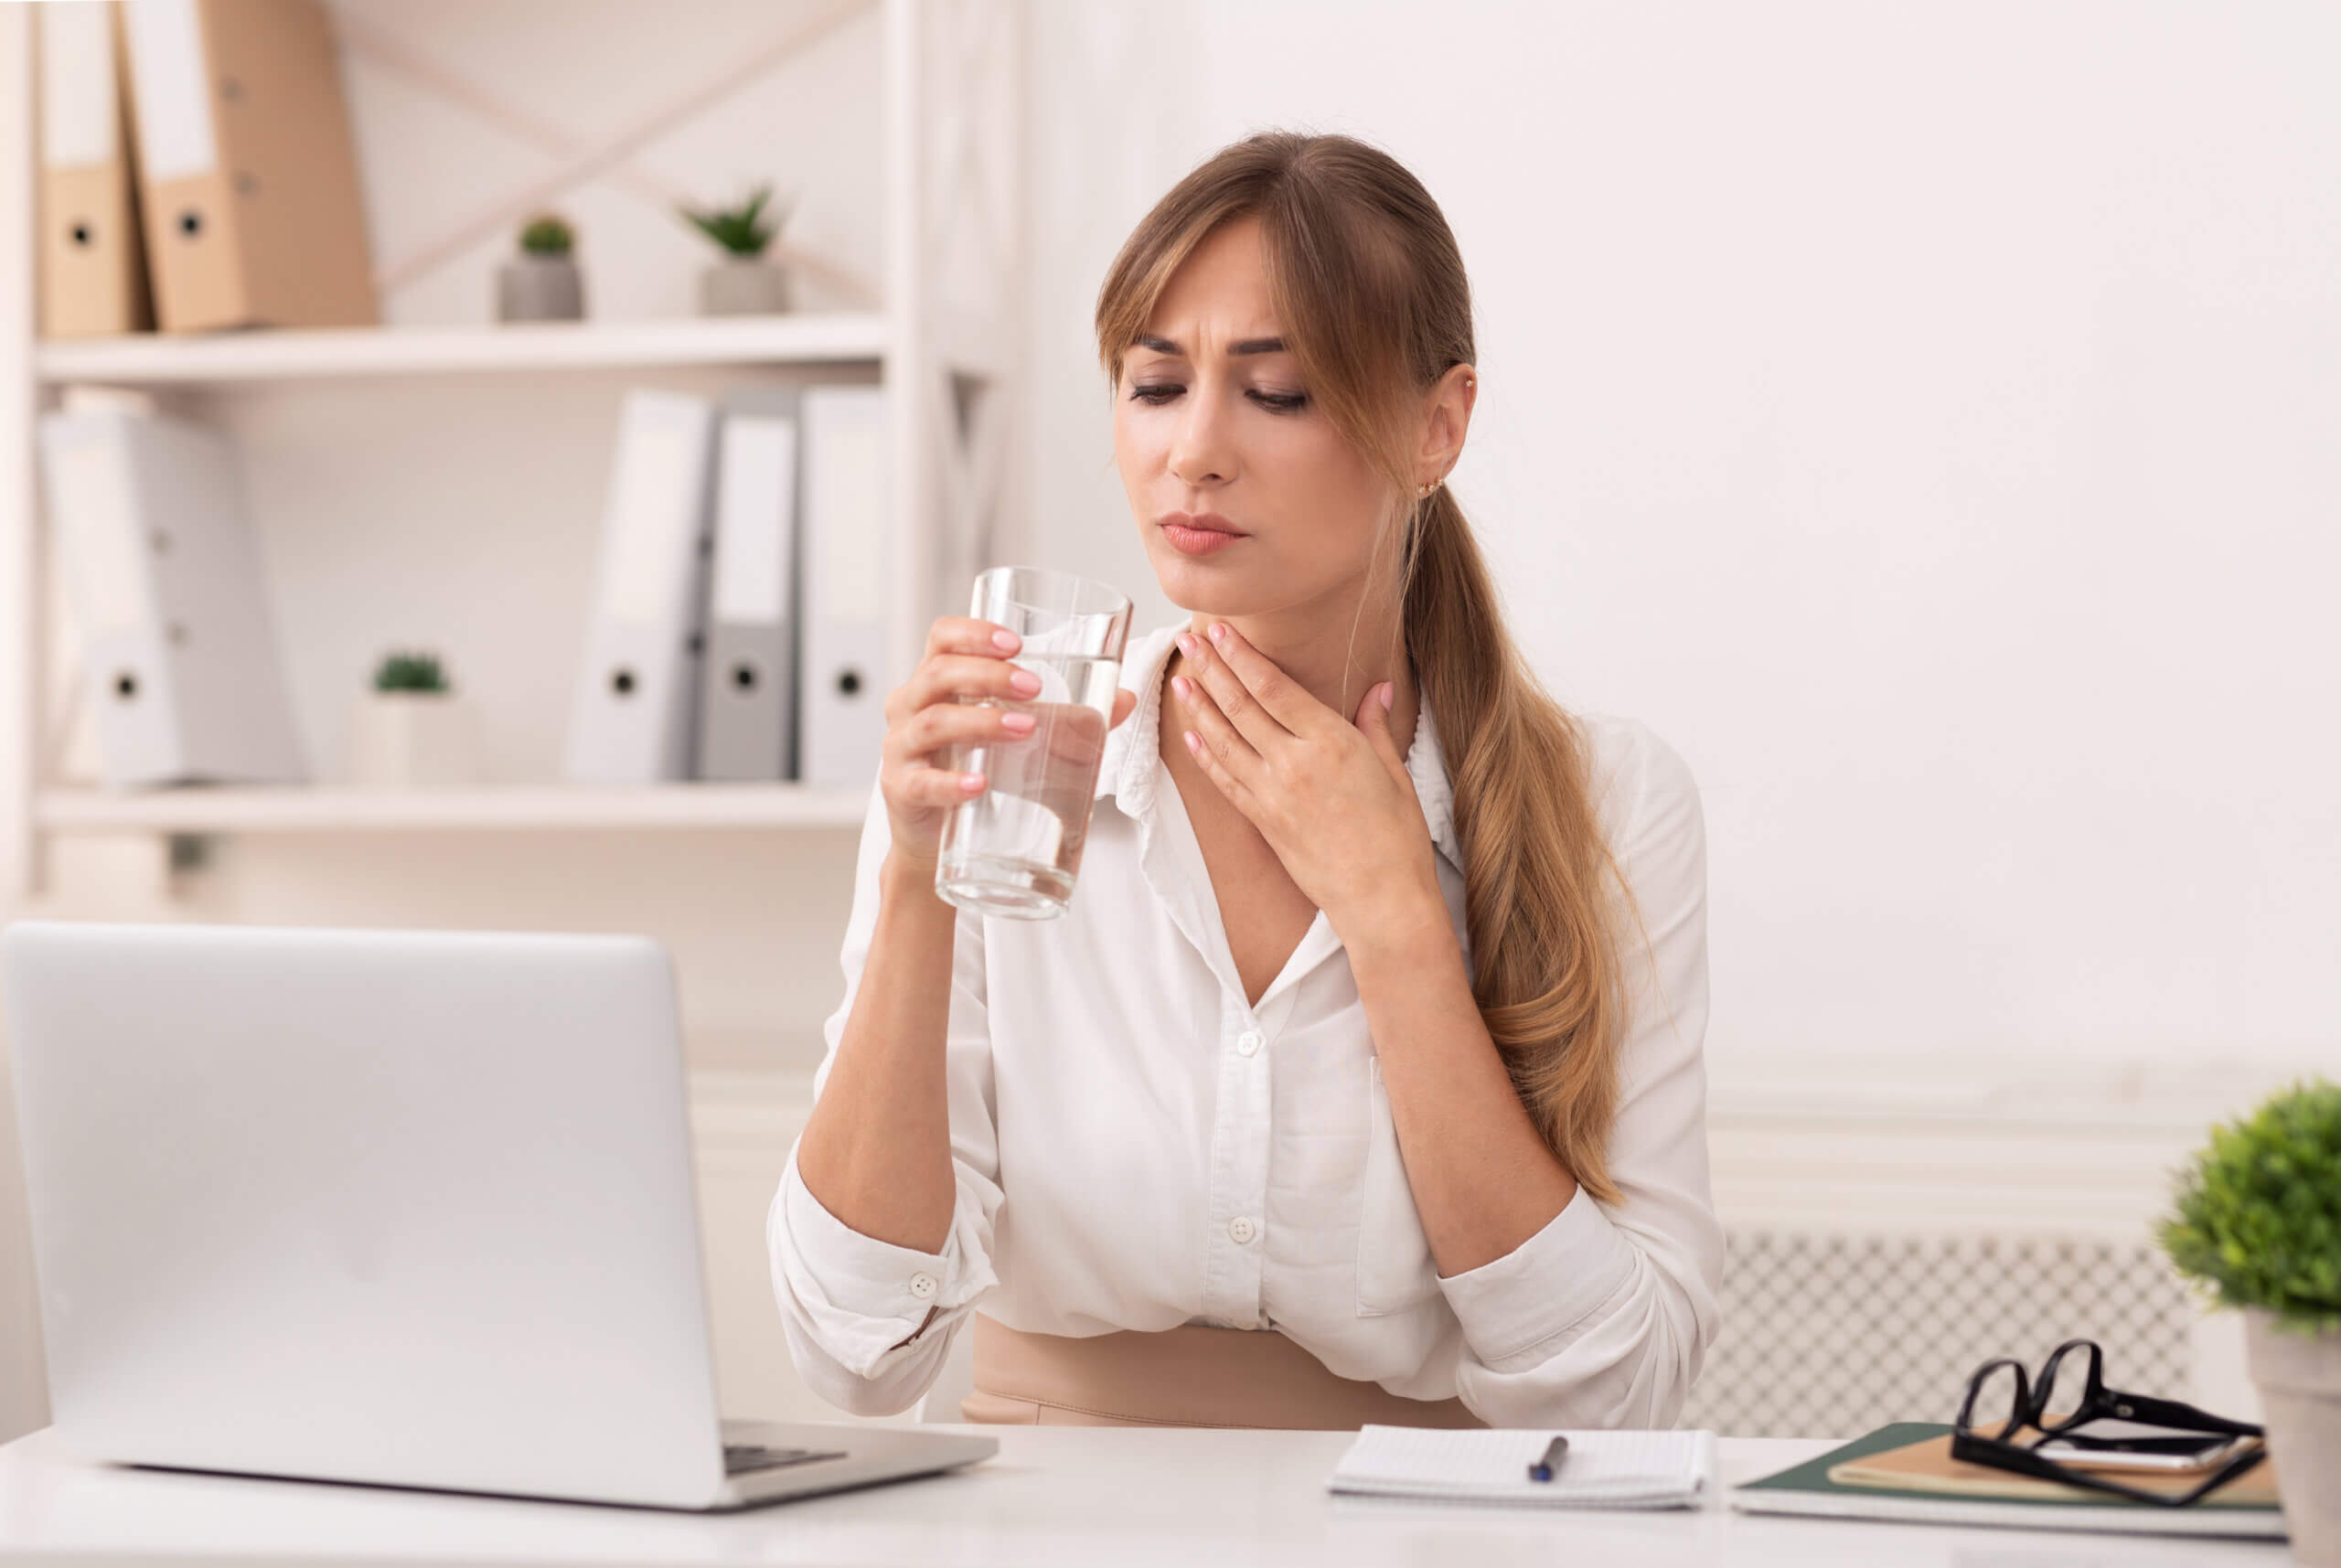 Sick Business Lady Having Sore Throat Holding Glass Of Water